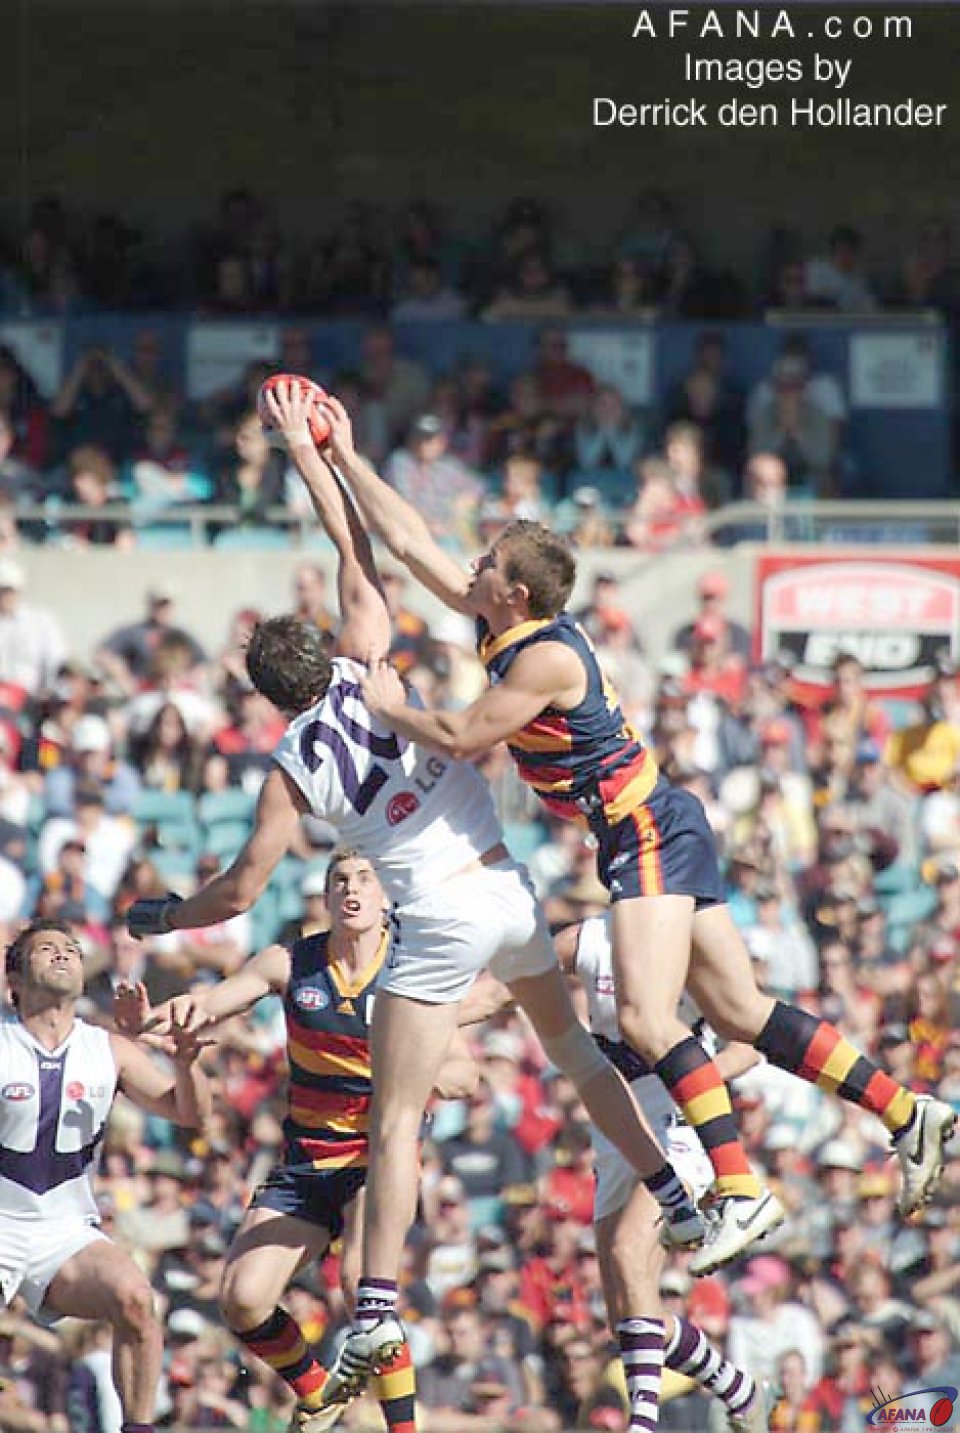 [b]The football is fiercely contested mid air in the Fremantle-v-Crows game[/b]